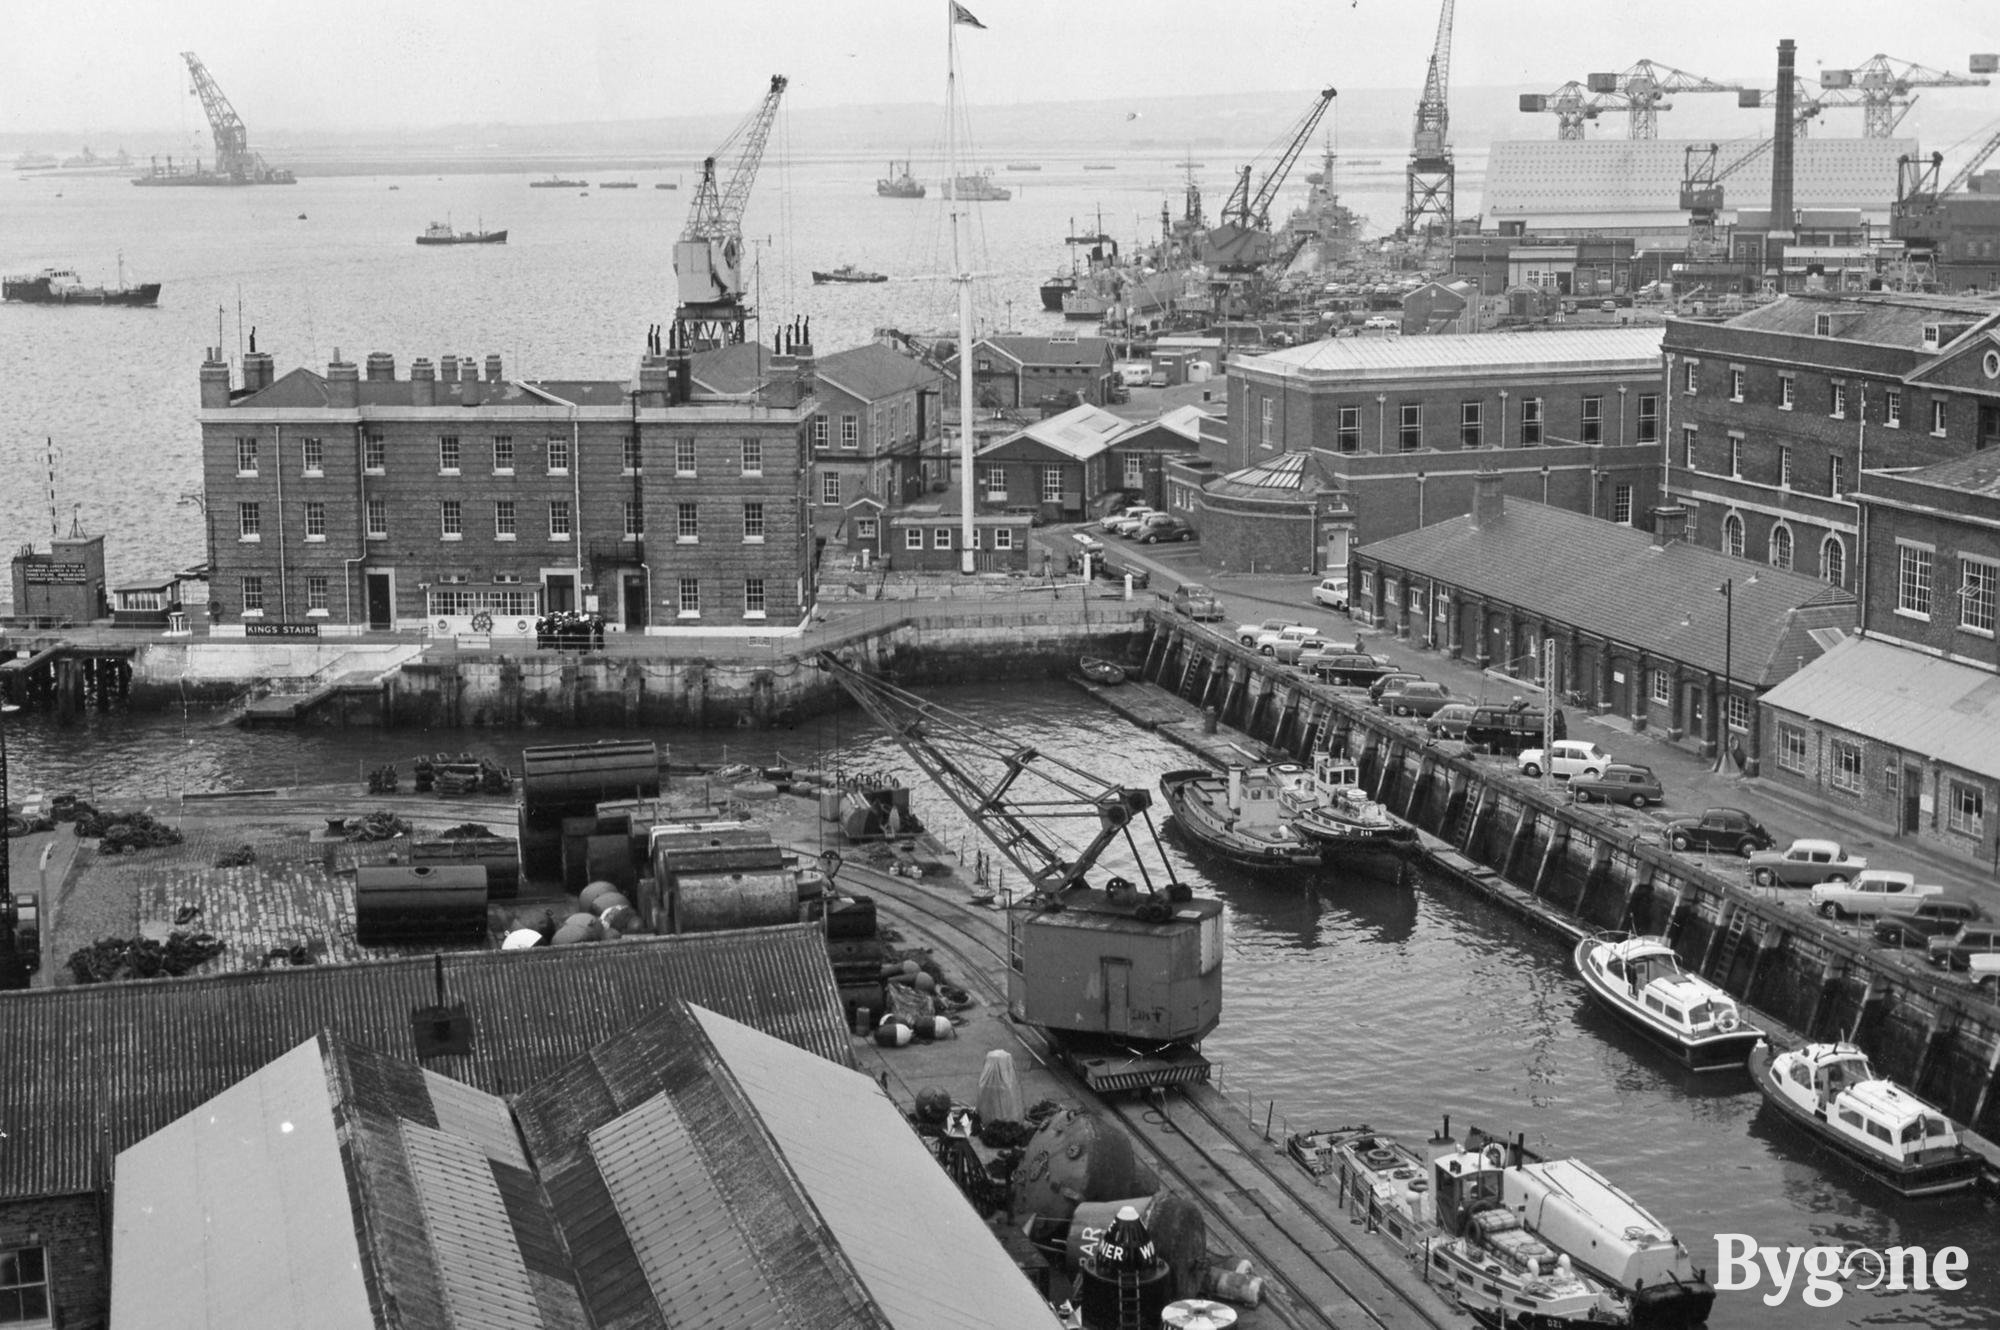 Dockyard, South Camber, Kings Stairs, 1970